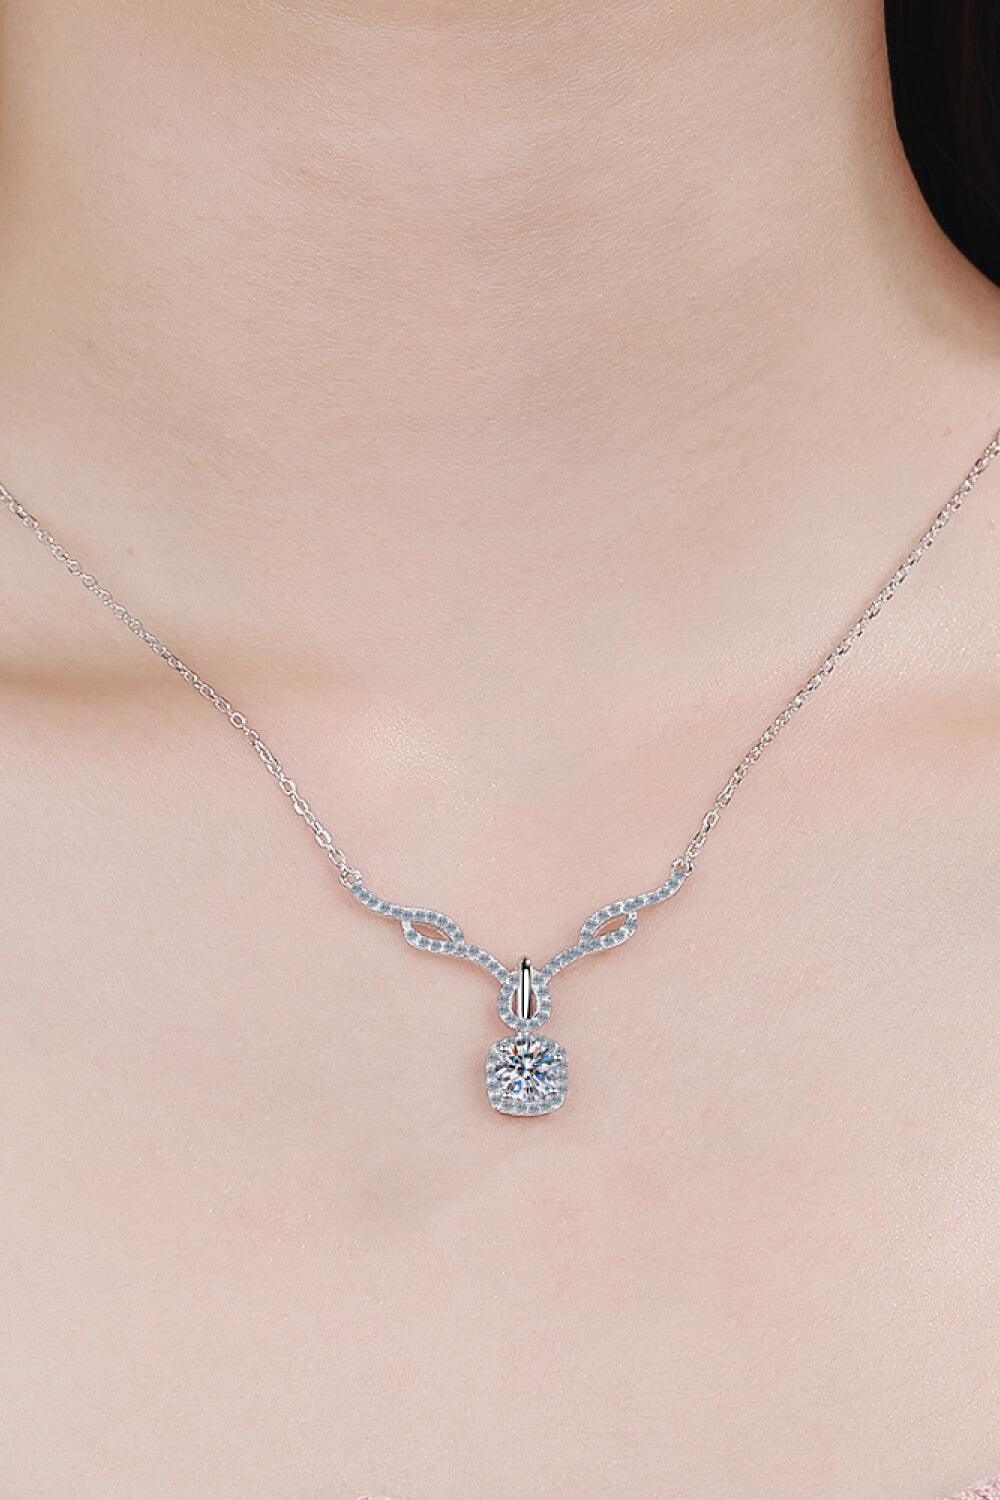 Ethereal Moissanite Pendant Sterling Silver Necklace - MXSTUDIO.COM